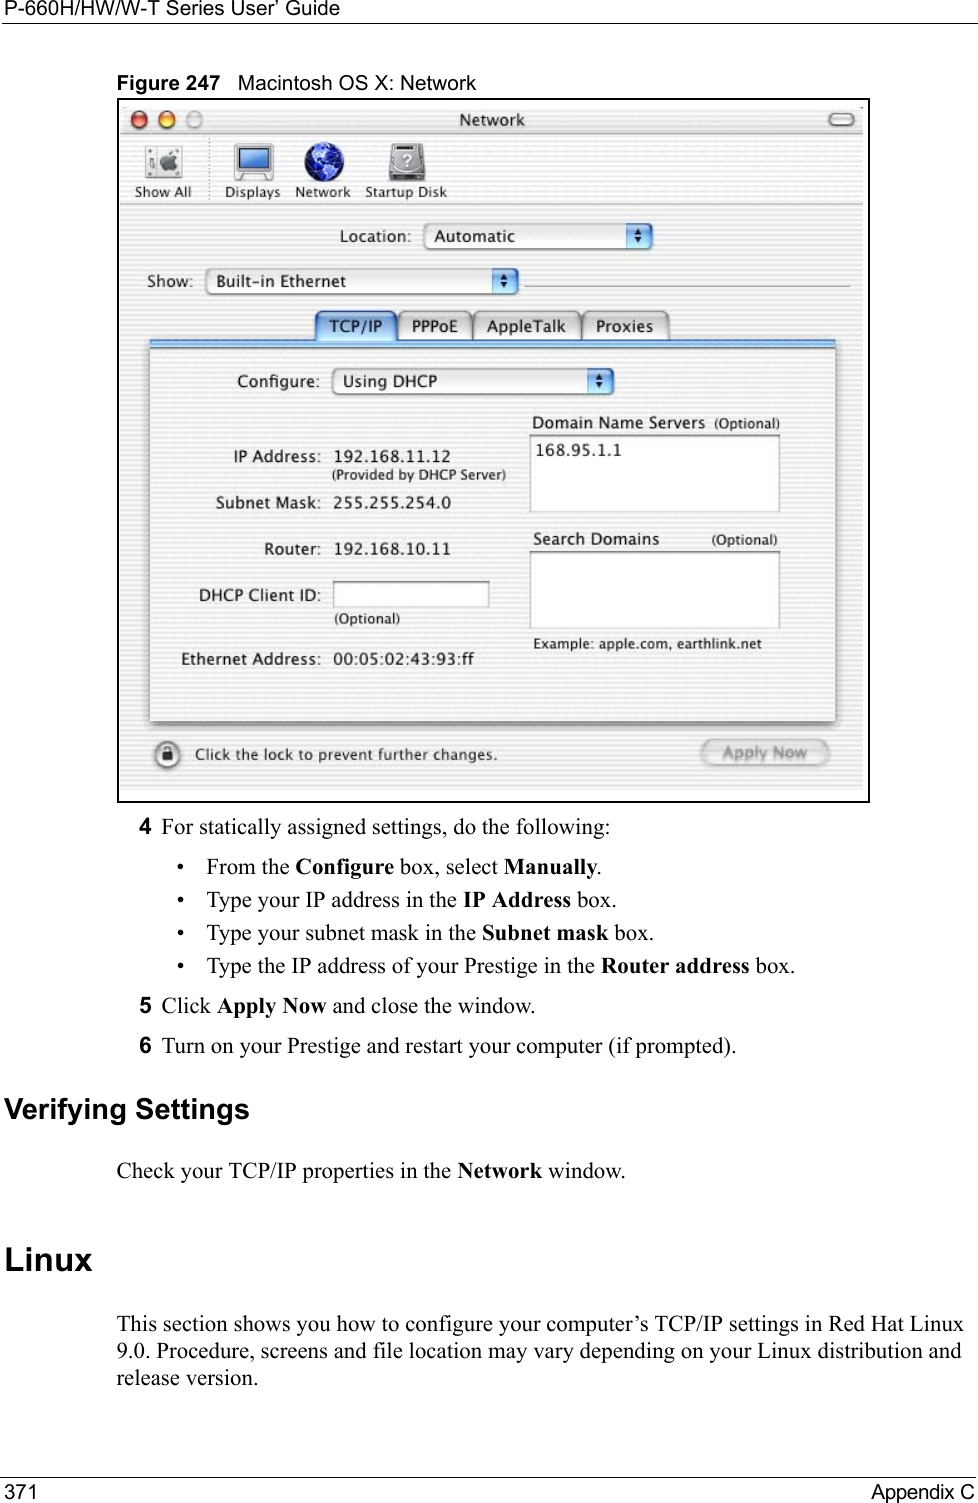 P-660H/HW/W-T Series User’ Guide371 Appendix CFigure 247   Macintosh OS X: Network4For statically assigned settings, do the following:•From the Configure box, select Manually.• Type your IP address in the IP Address box.• Type your subnet mask in the Subnet mask box.• Type the IP address of your Prestige in the Router address box.5Click Apply Now and close the window.6Turn on your Prestige and restart your computer (if prompted).Verifying SettingsCheck your TCP/IP properties in the Network window.Linux This section shows you how to configure your computer’s TCP/IP settings in Red Hat Linux 9.0. Procedure, screens and file location may vary depending on your Linux distribution and release version. 